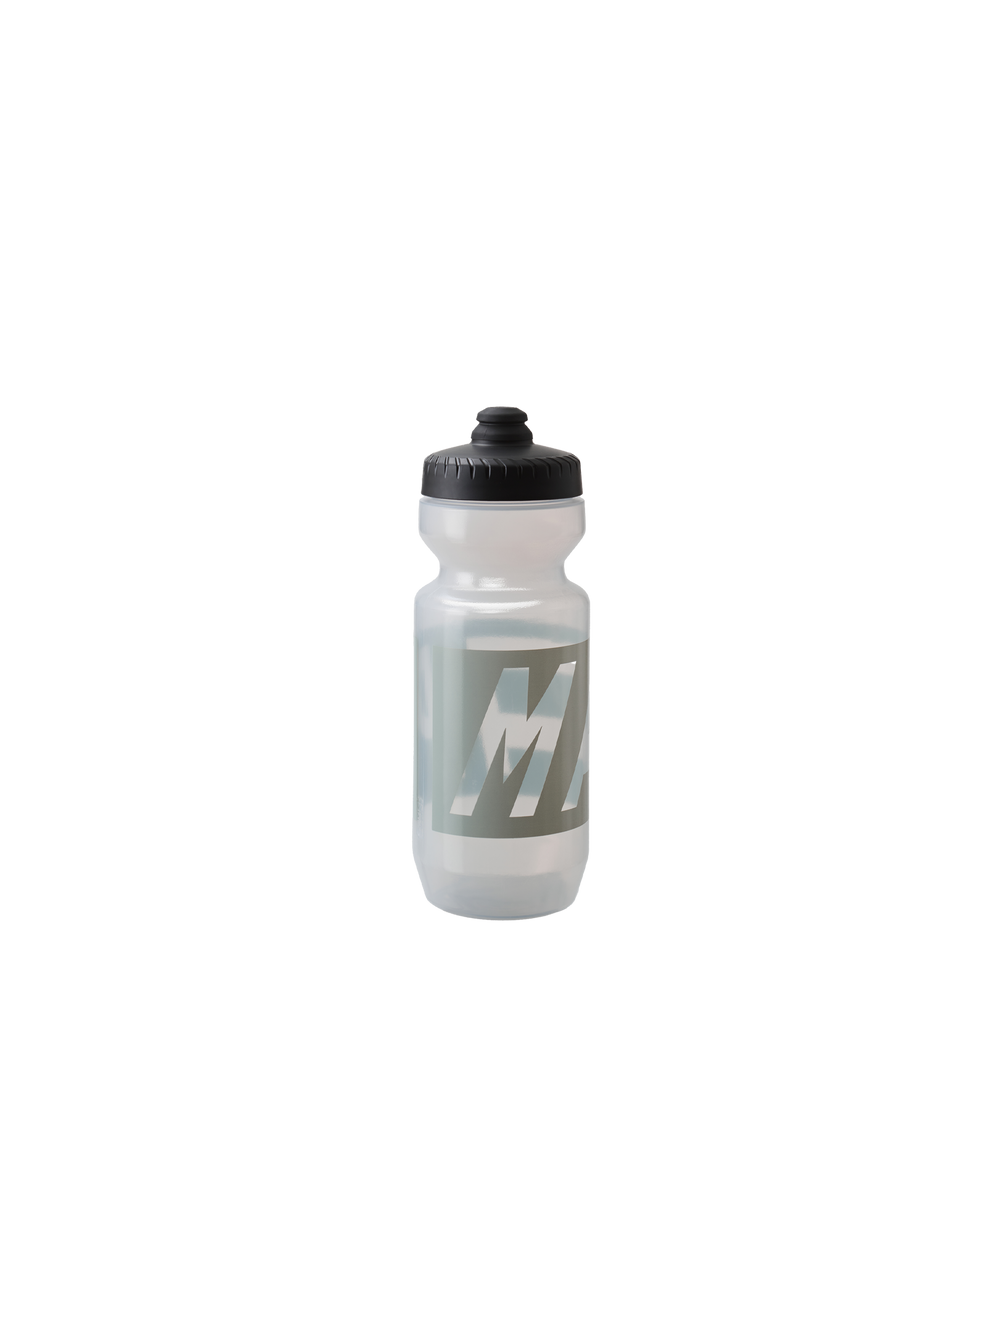 Product Image for Adapt Bottle